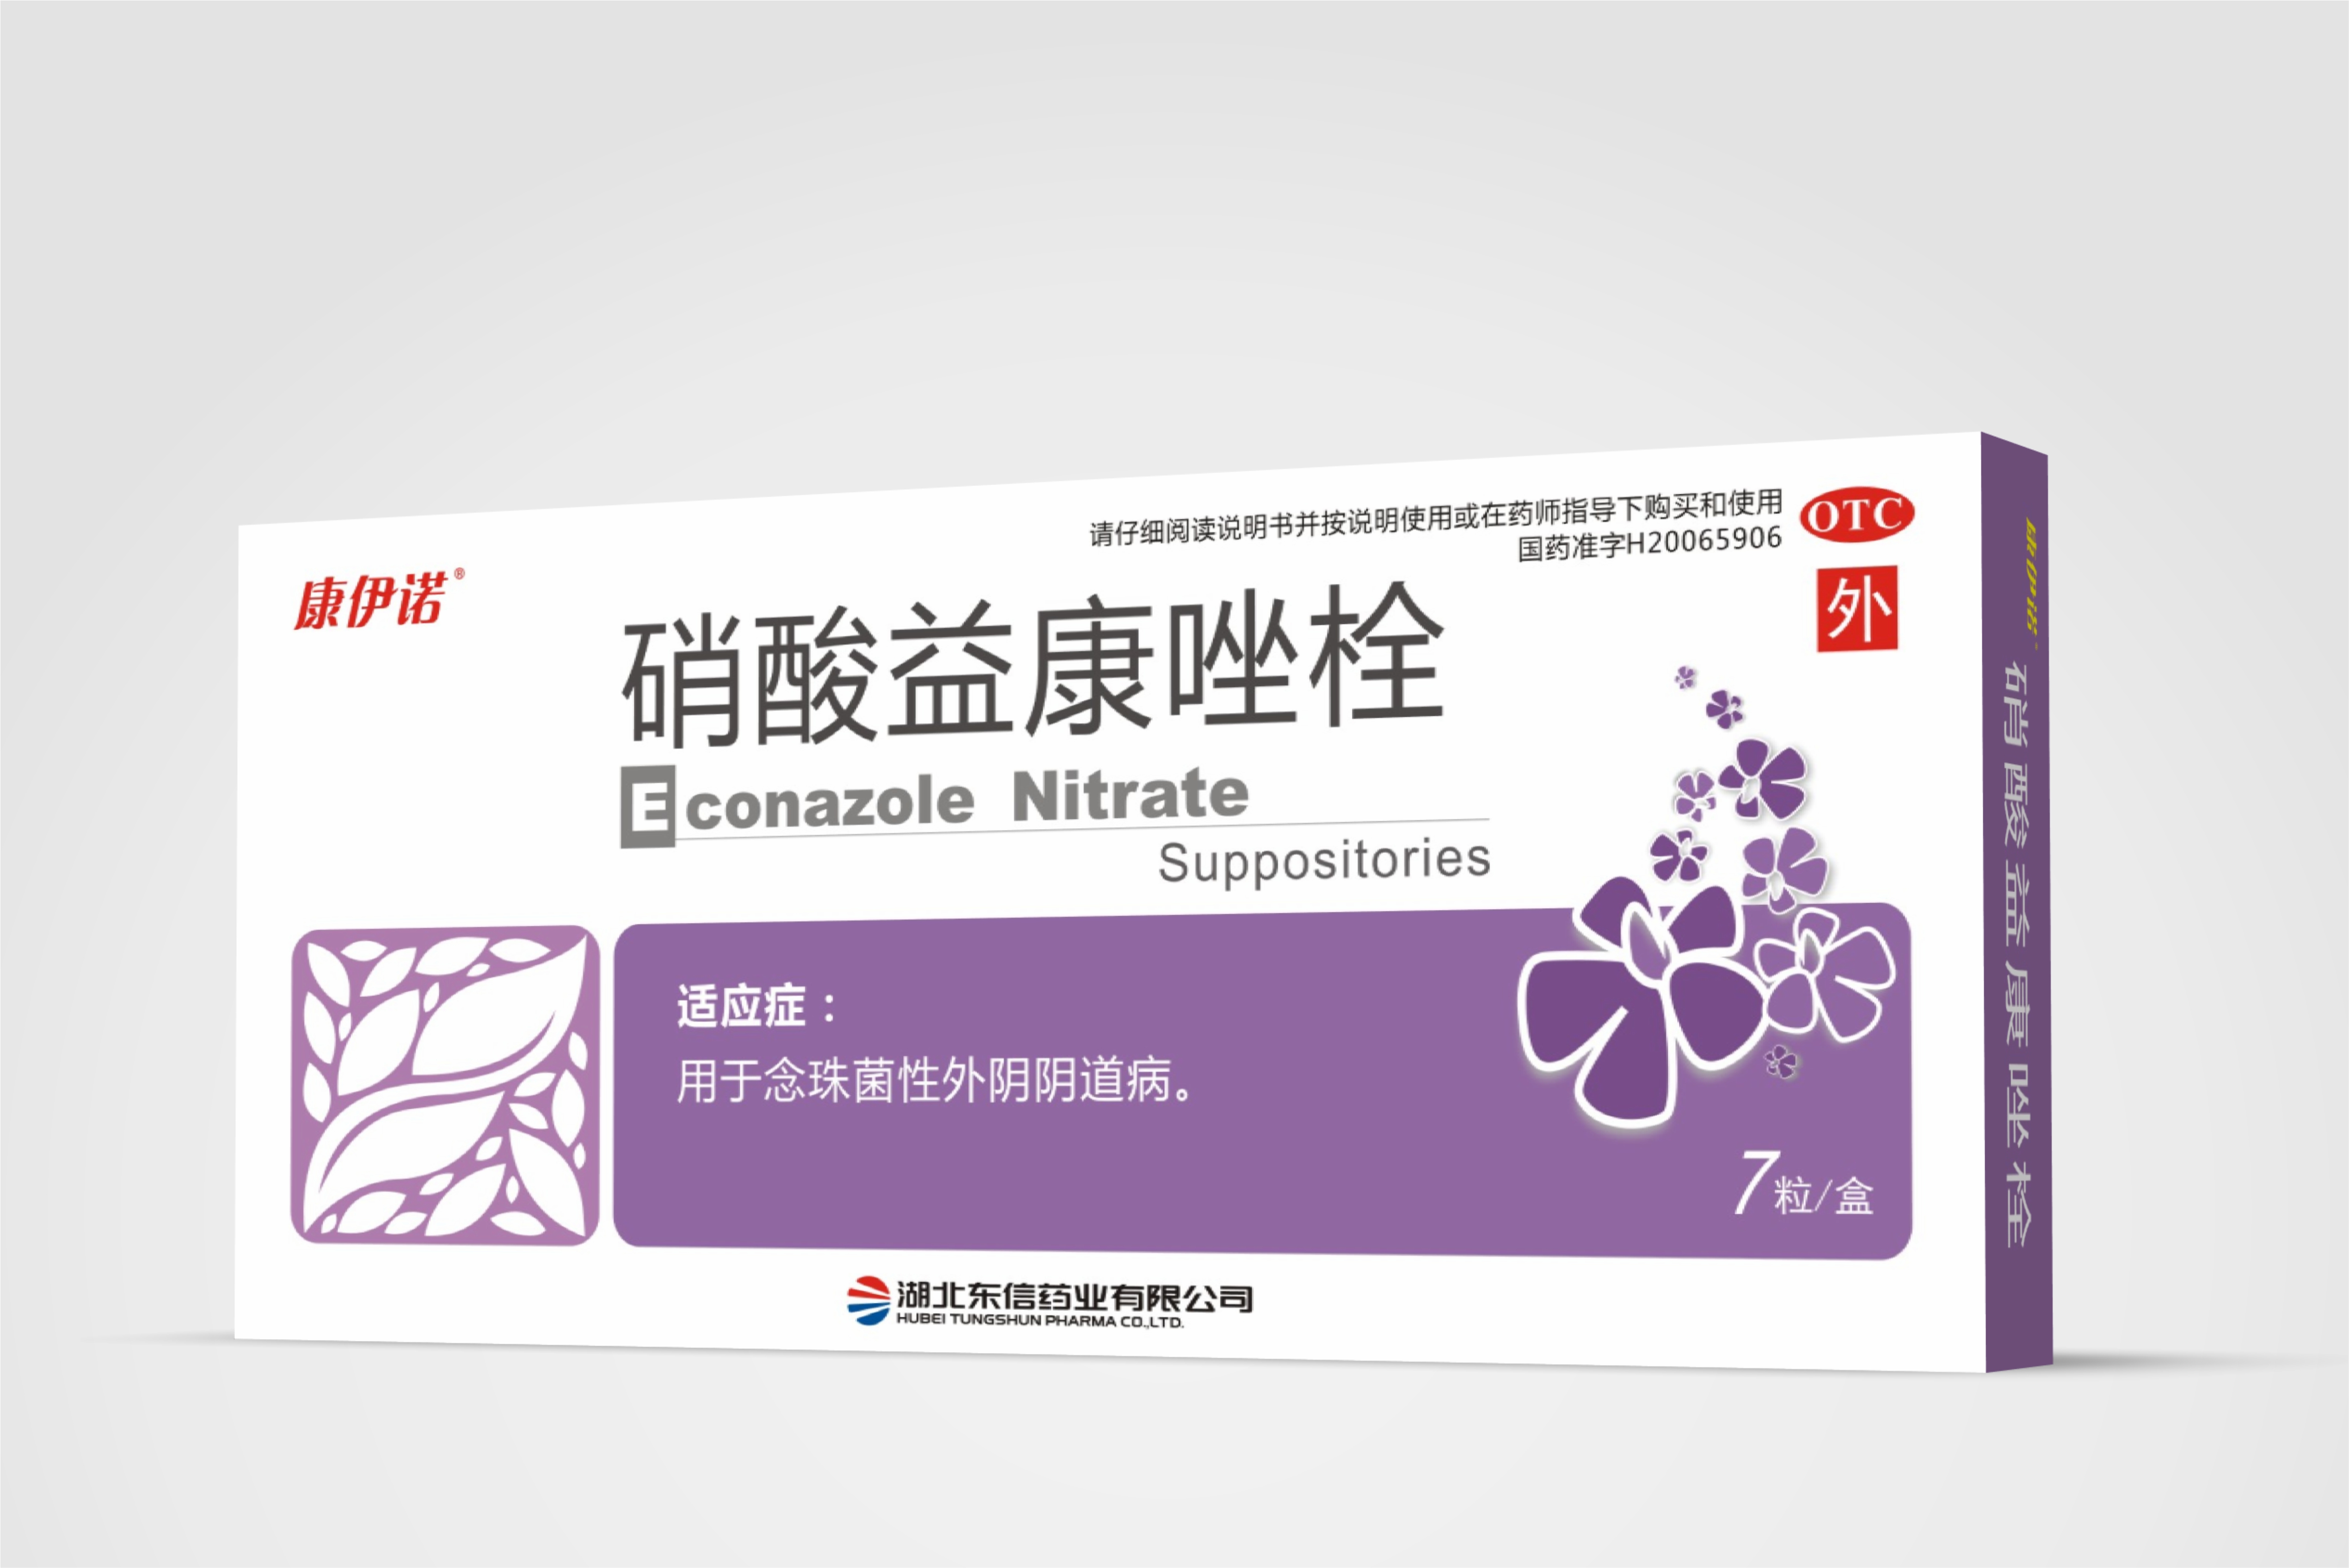 Miconazole Nitrate Vaginal Suppository 达克宁(妇科用) 硝酸咪康唑栓 – KHT Herbs & Goods